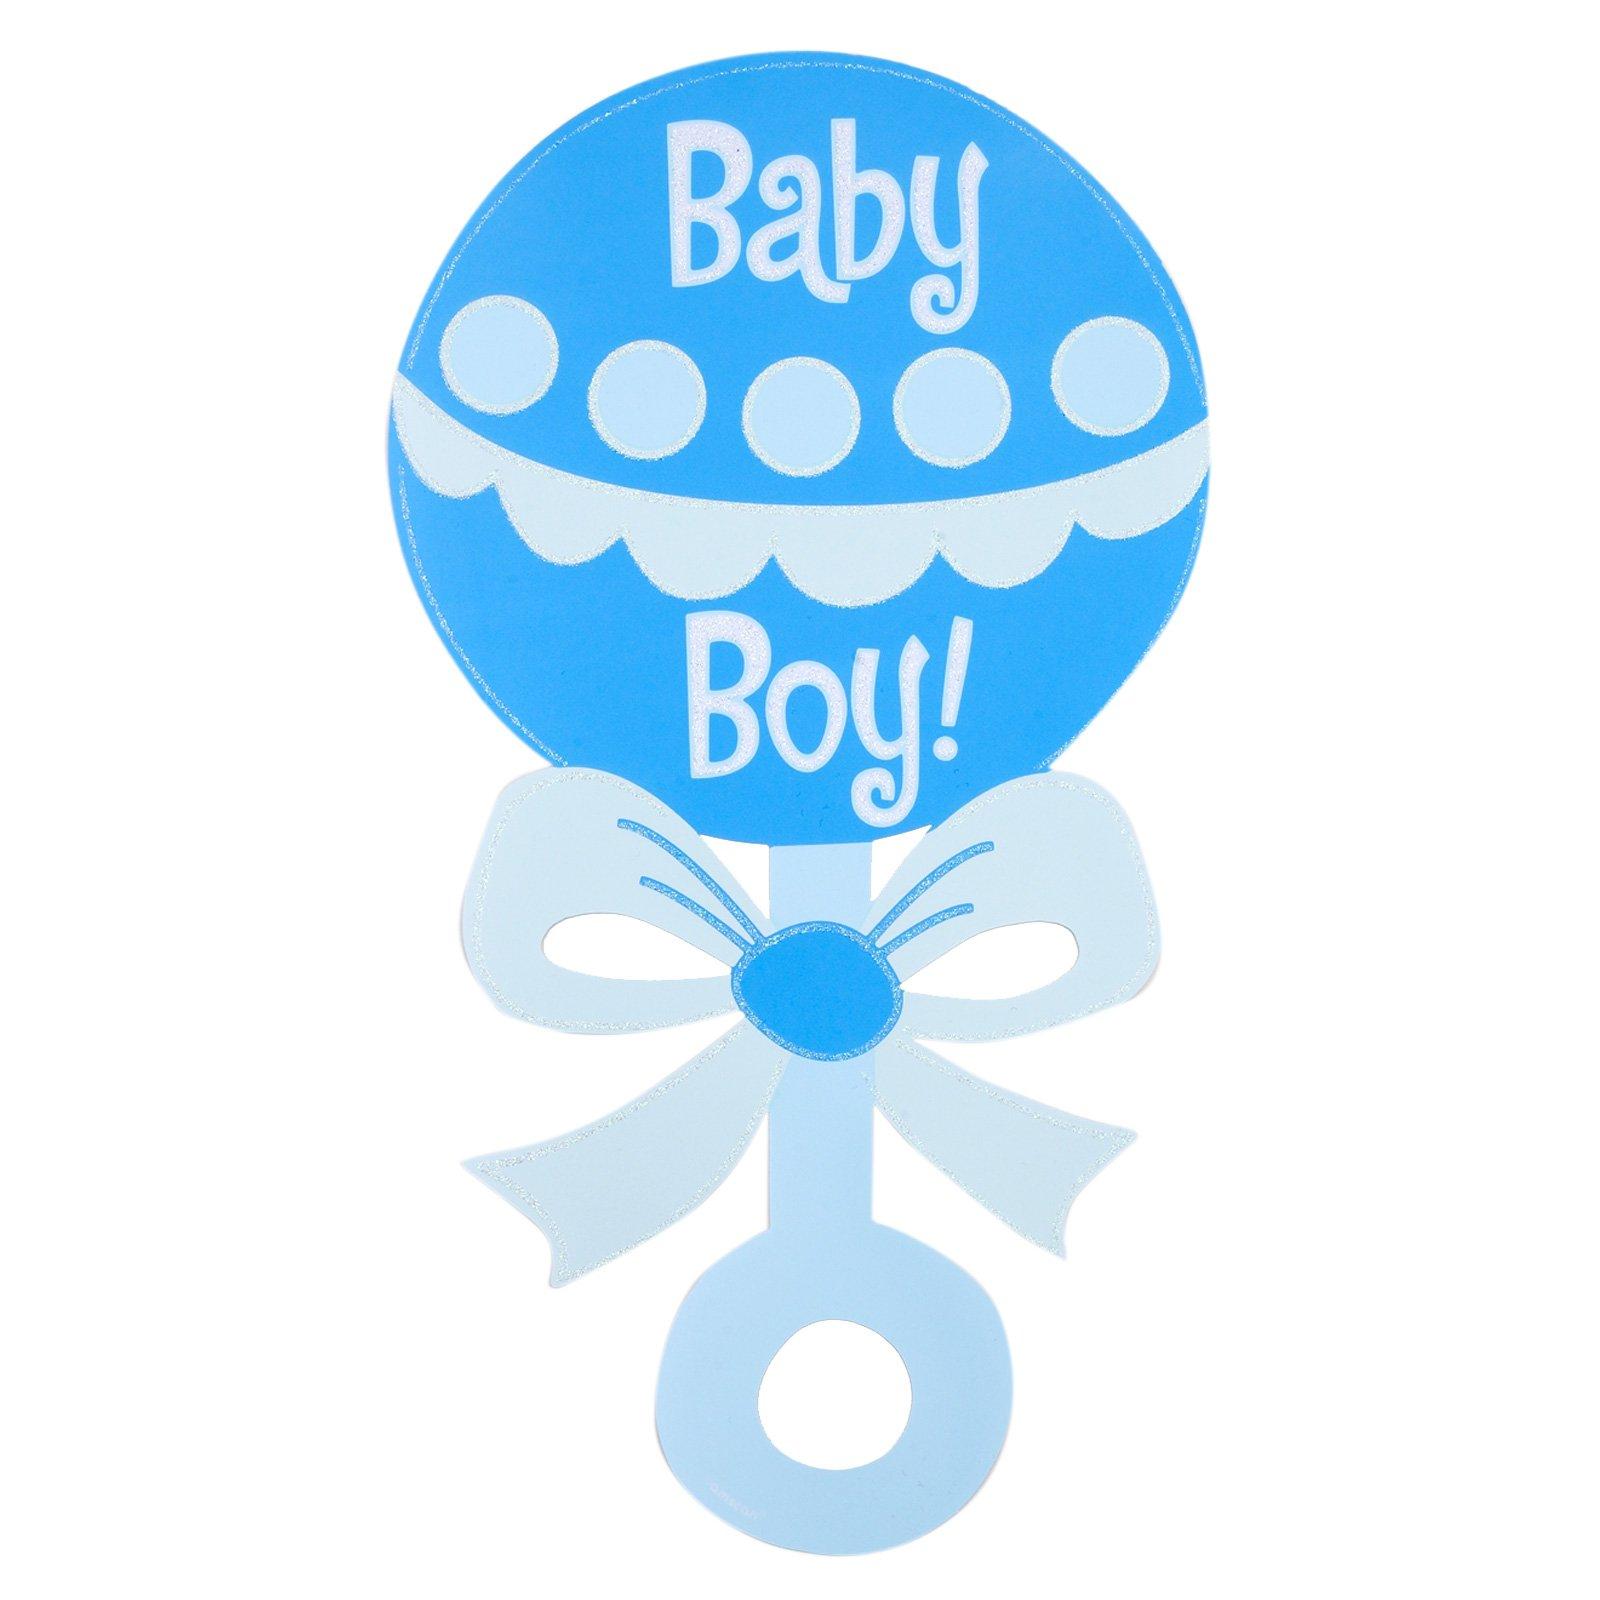 Baby boy toys clipart cliparthut free clipart 2